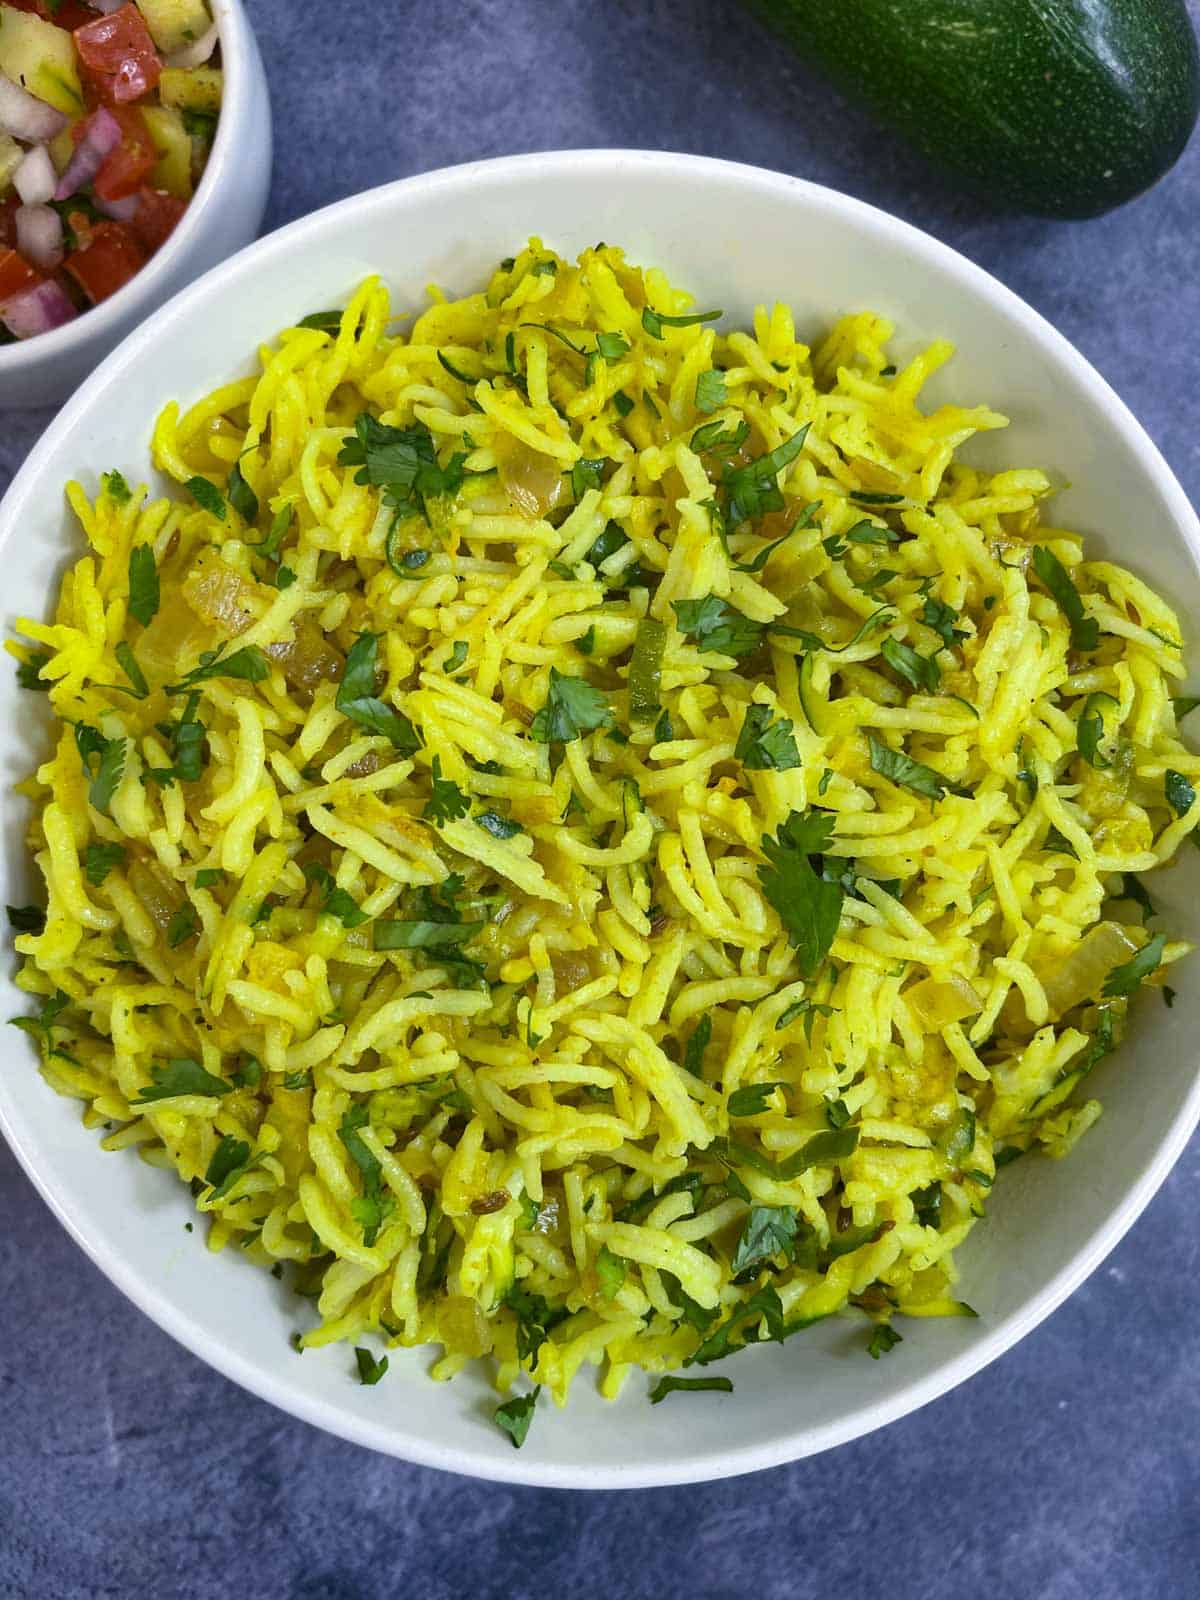 zucchini rice pilaf served in a bowl garnished with coriander leaves